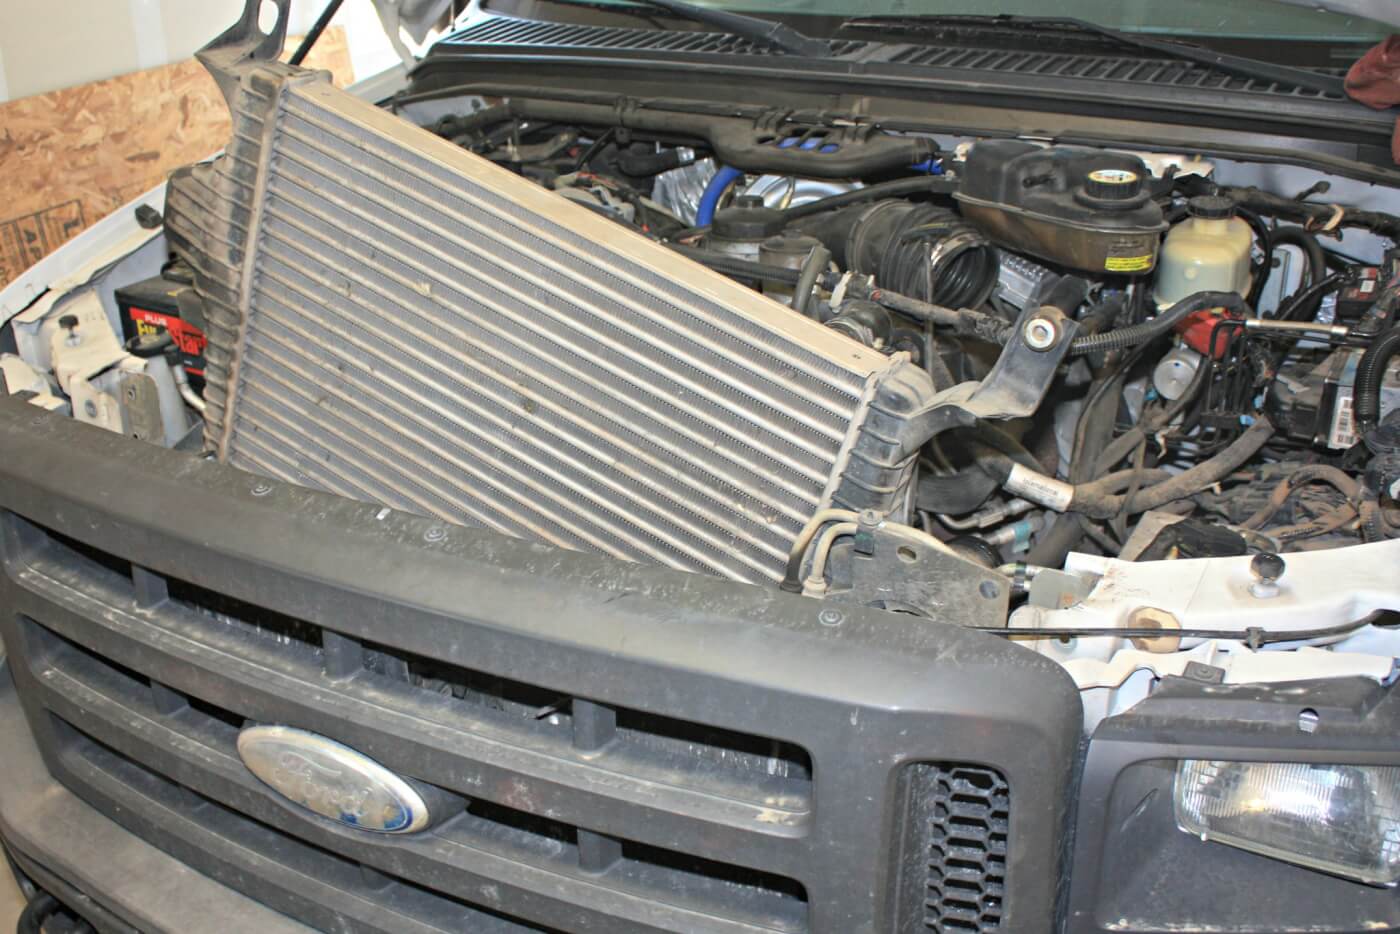 11. Once the upper core support and factory intercooler pipes have been removed, it’s just a matter of wiggling the stock intercooler up and out of the truck. It may be worth your while to enlist the help of a friend for this part of the job, as the intercooler can be a bit tough to sneak out by yourself.